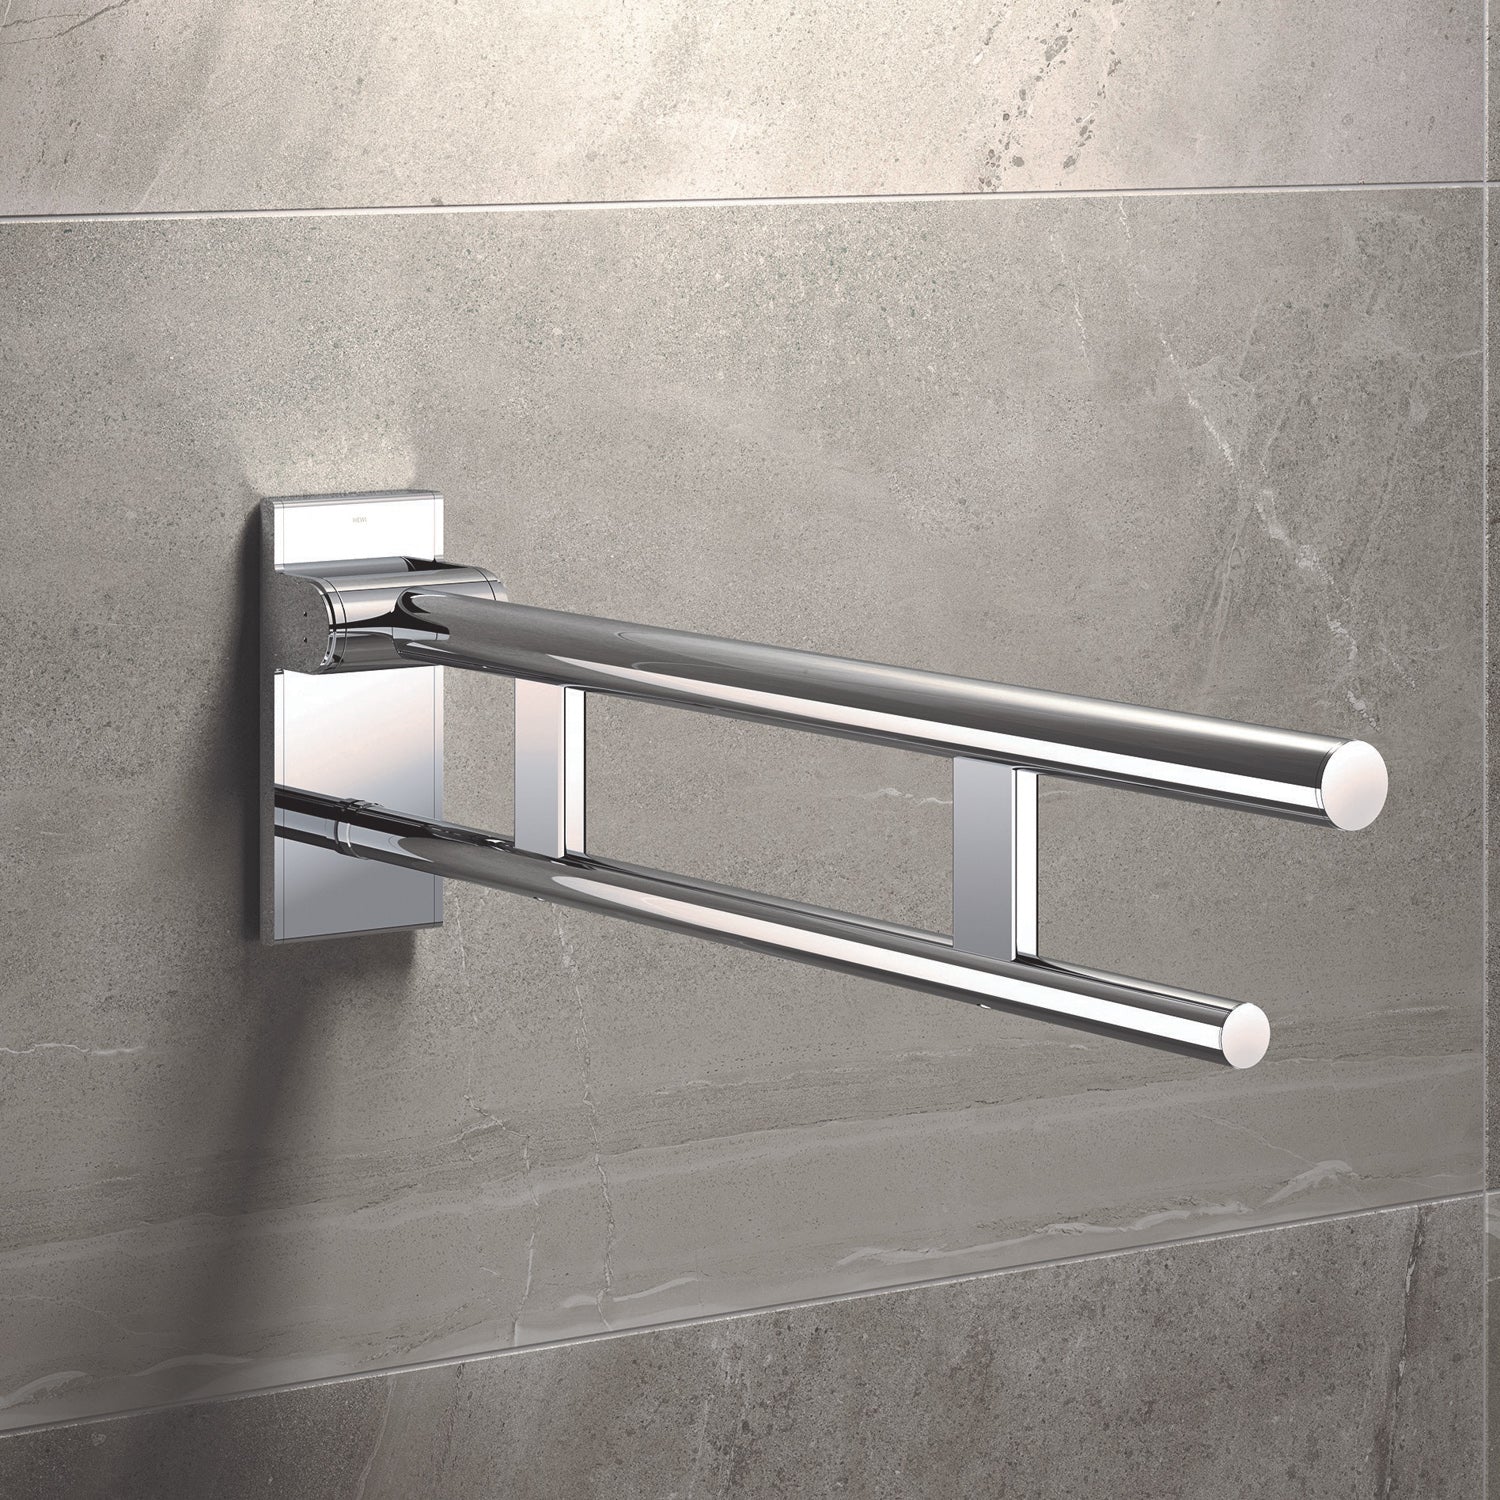 600mm Freestyle Hinged Grab Rail with a chrome finish lifestyle image